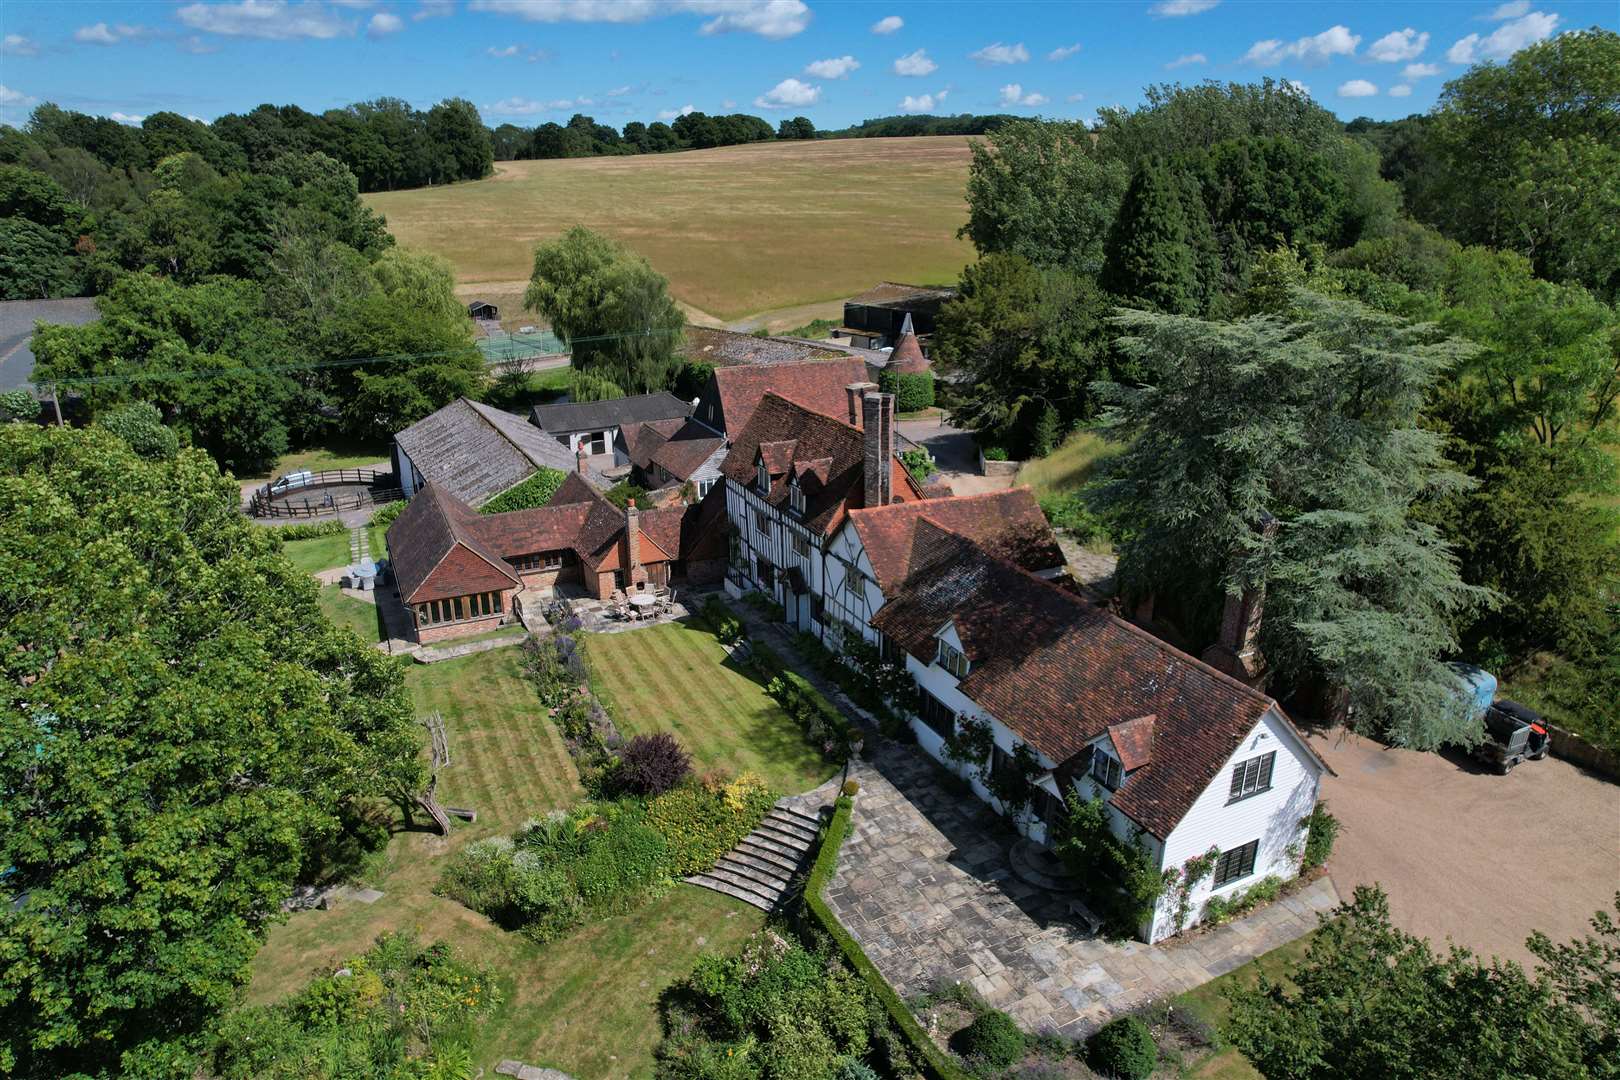 The Grade II listed property is surrounded by beautiful countryside. Picture: Savills